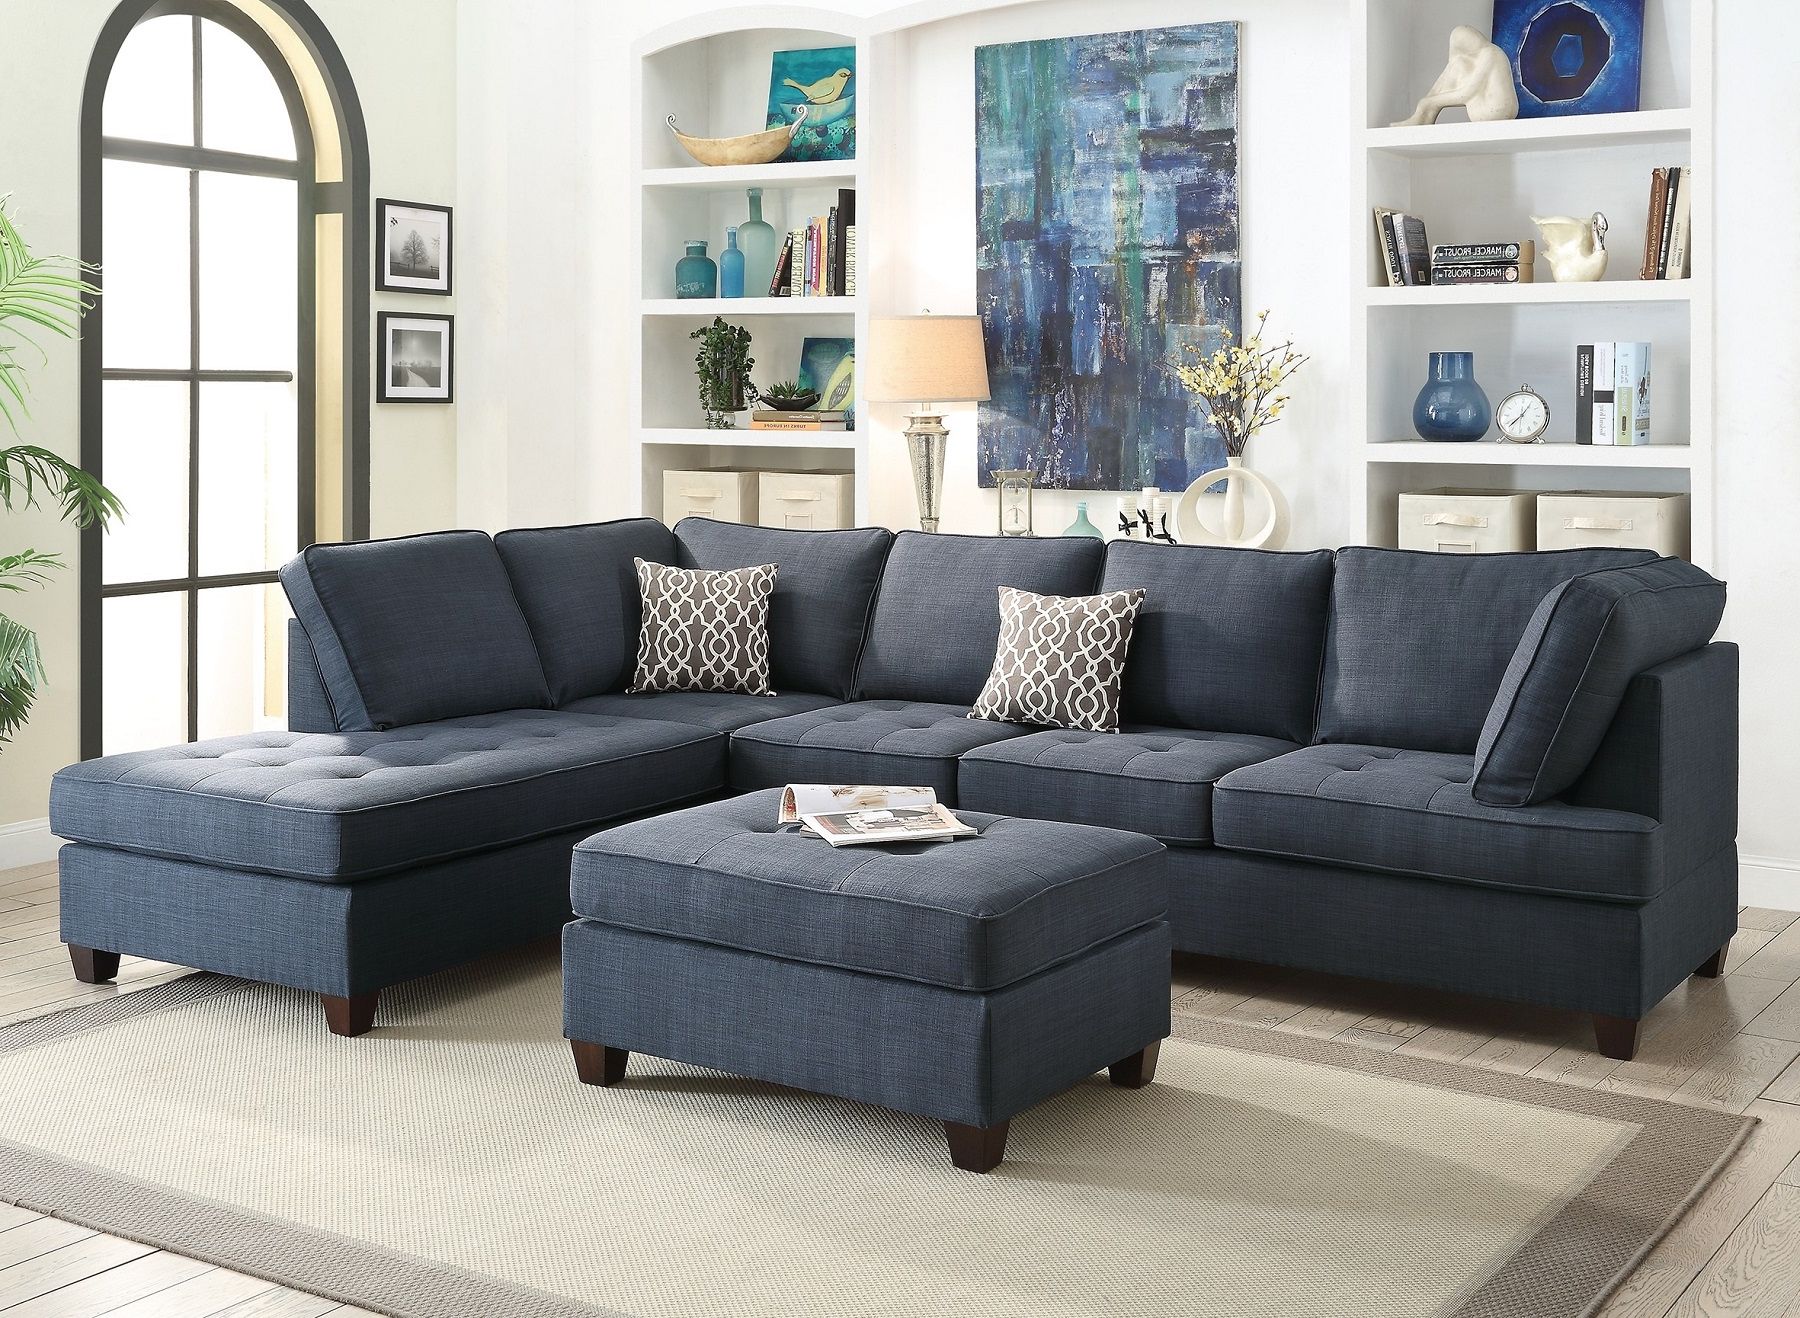 Dark Blue Dorris Fabric Smooth Textured Sectional Sofa Chaise 2pcs Set For Fashionable Blue Fabric Lounge Chair And Ottomans Set (View 10 of 10)